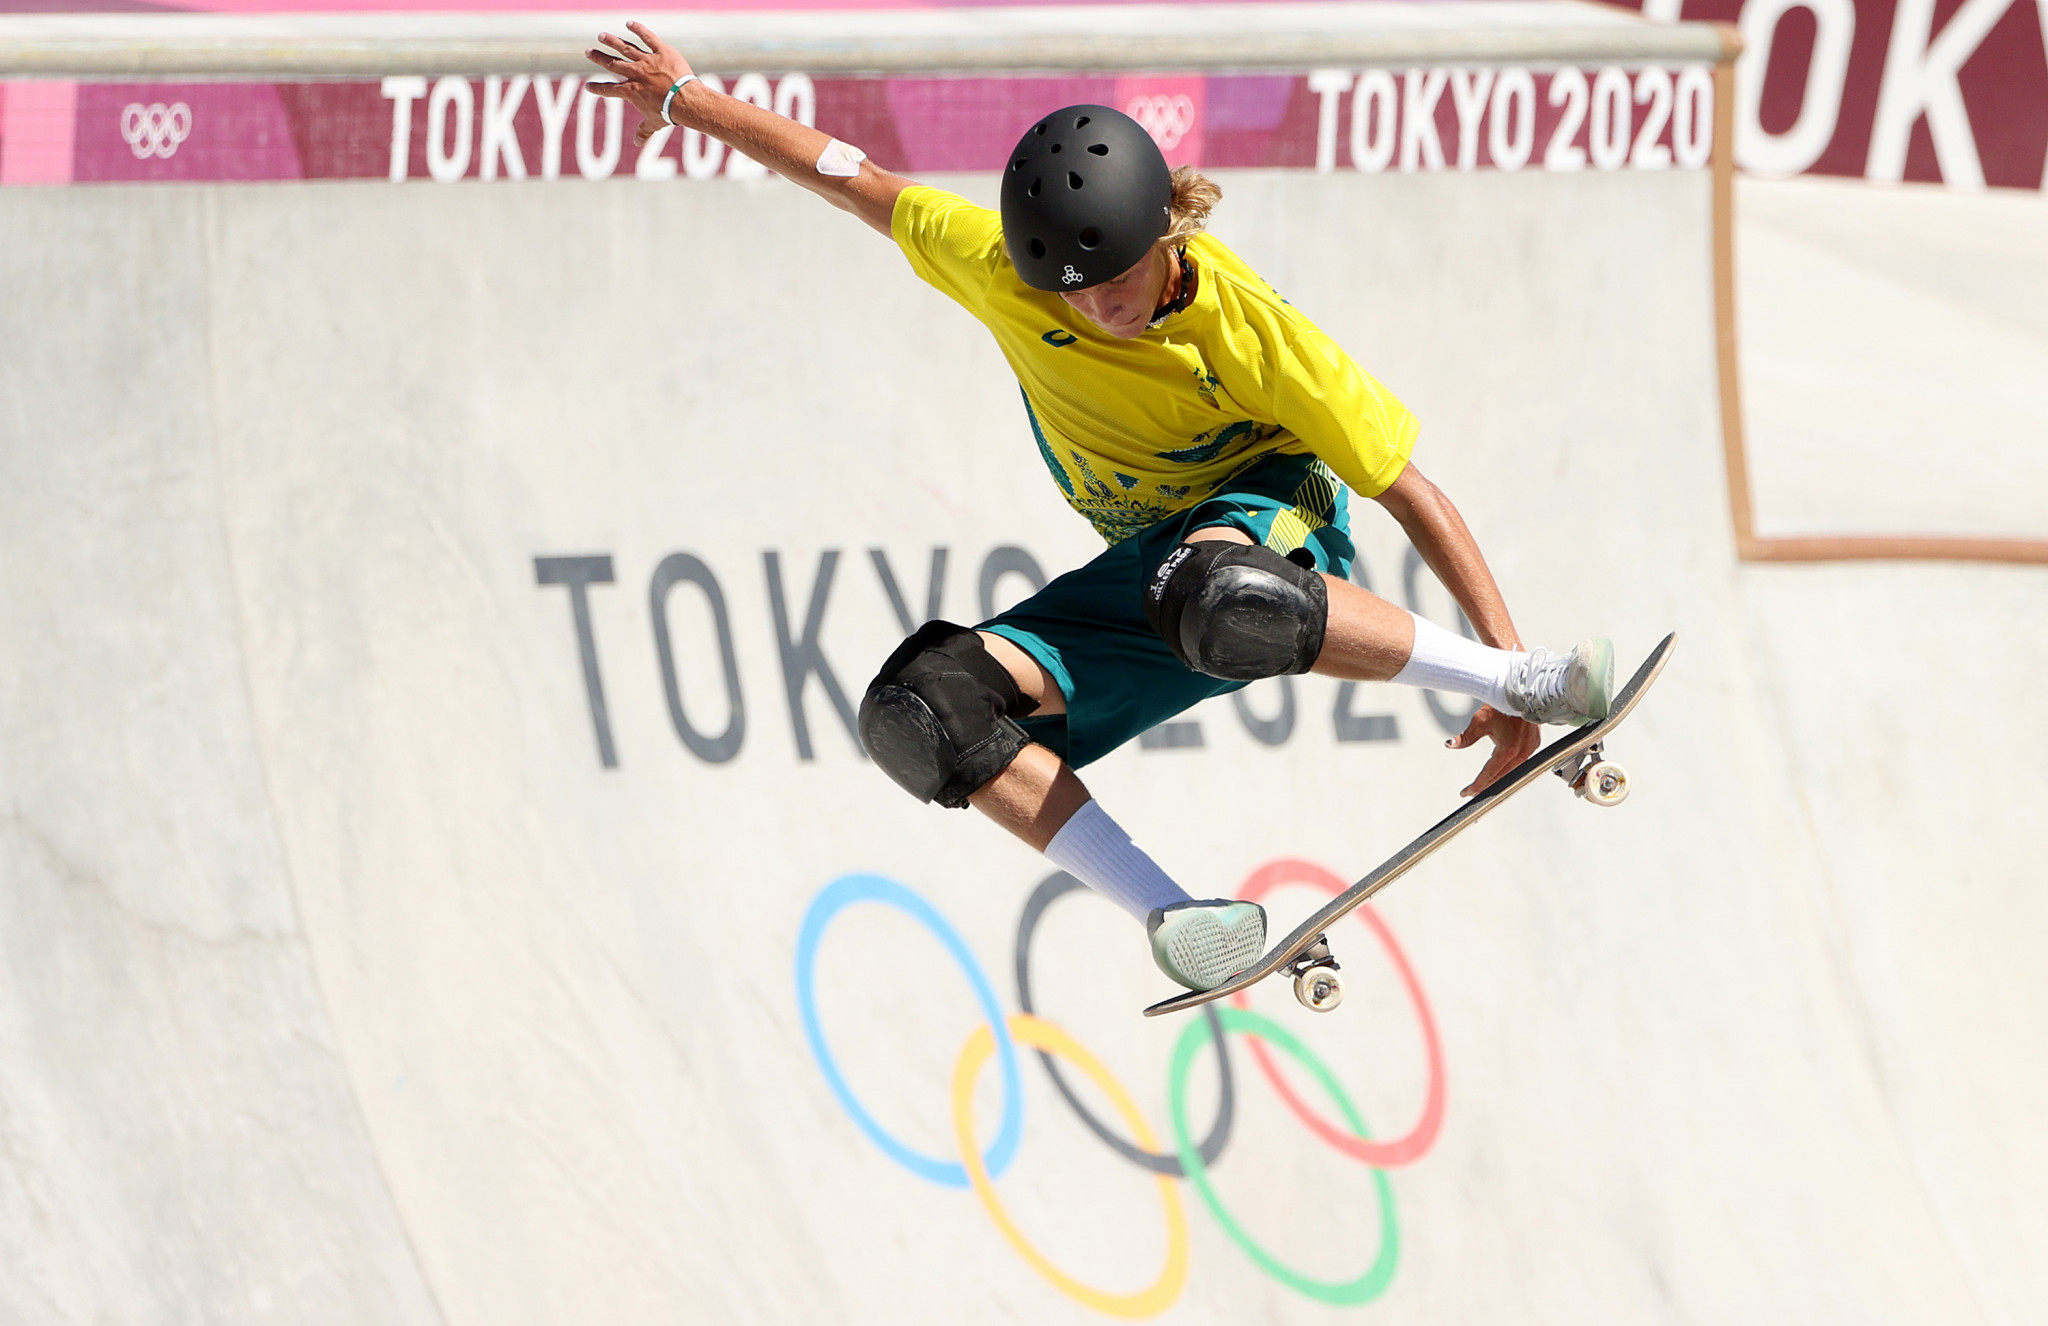 Skateboarding made its Olympic debut last year at Tokyo 2020 ©Getty Images